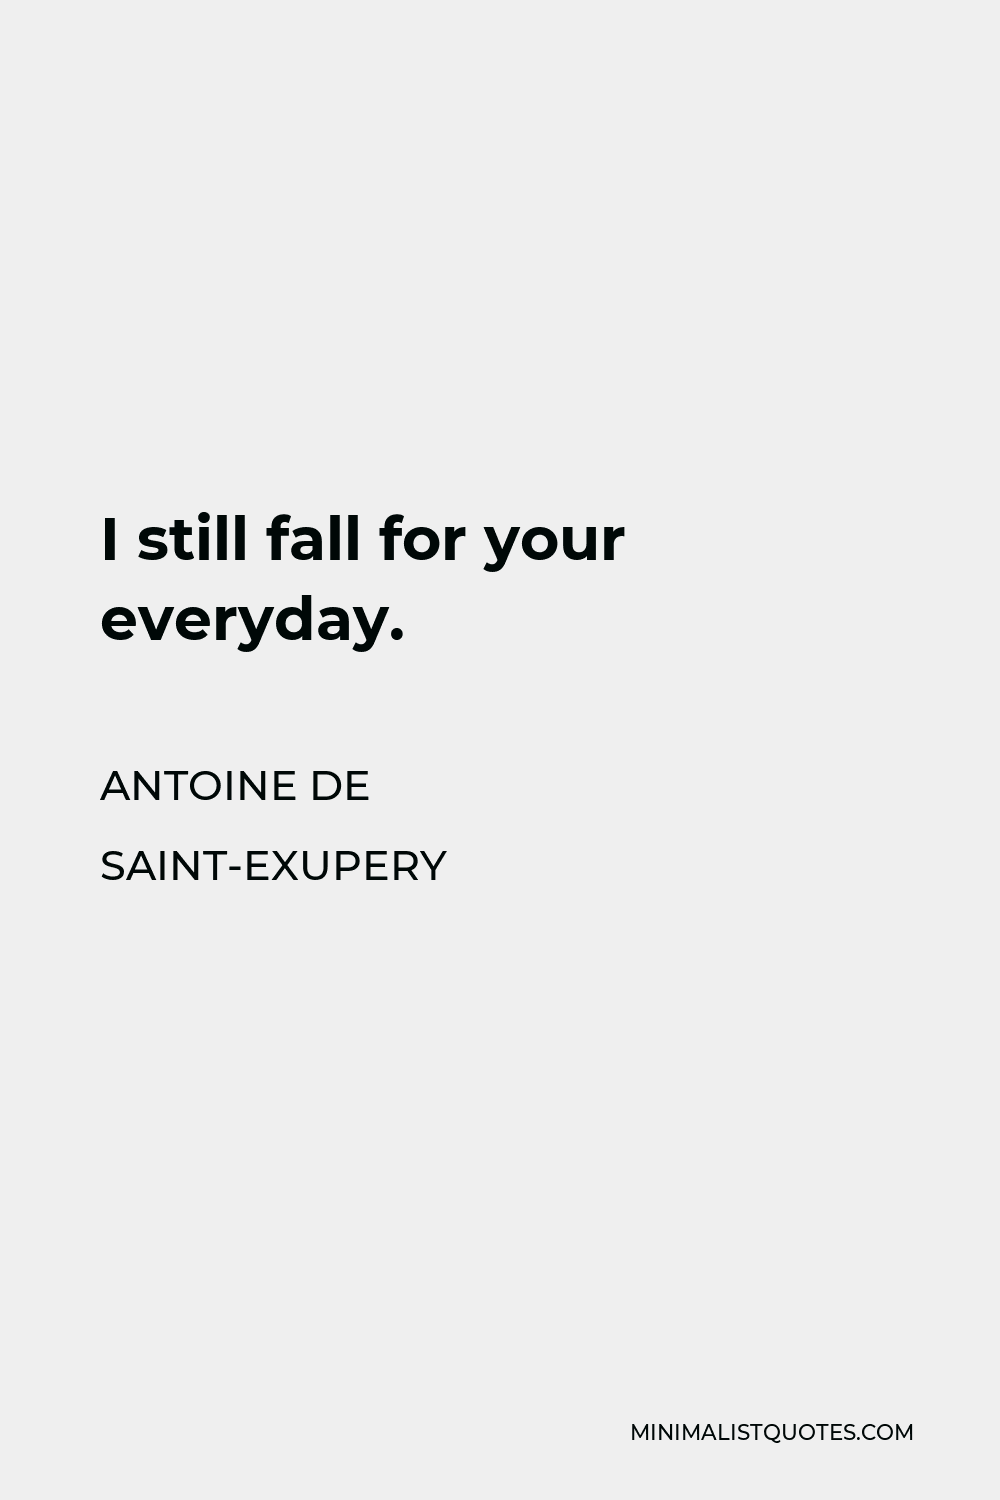 Antoine de Saint-Exupery Quote - I still fall for your everyday.